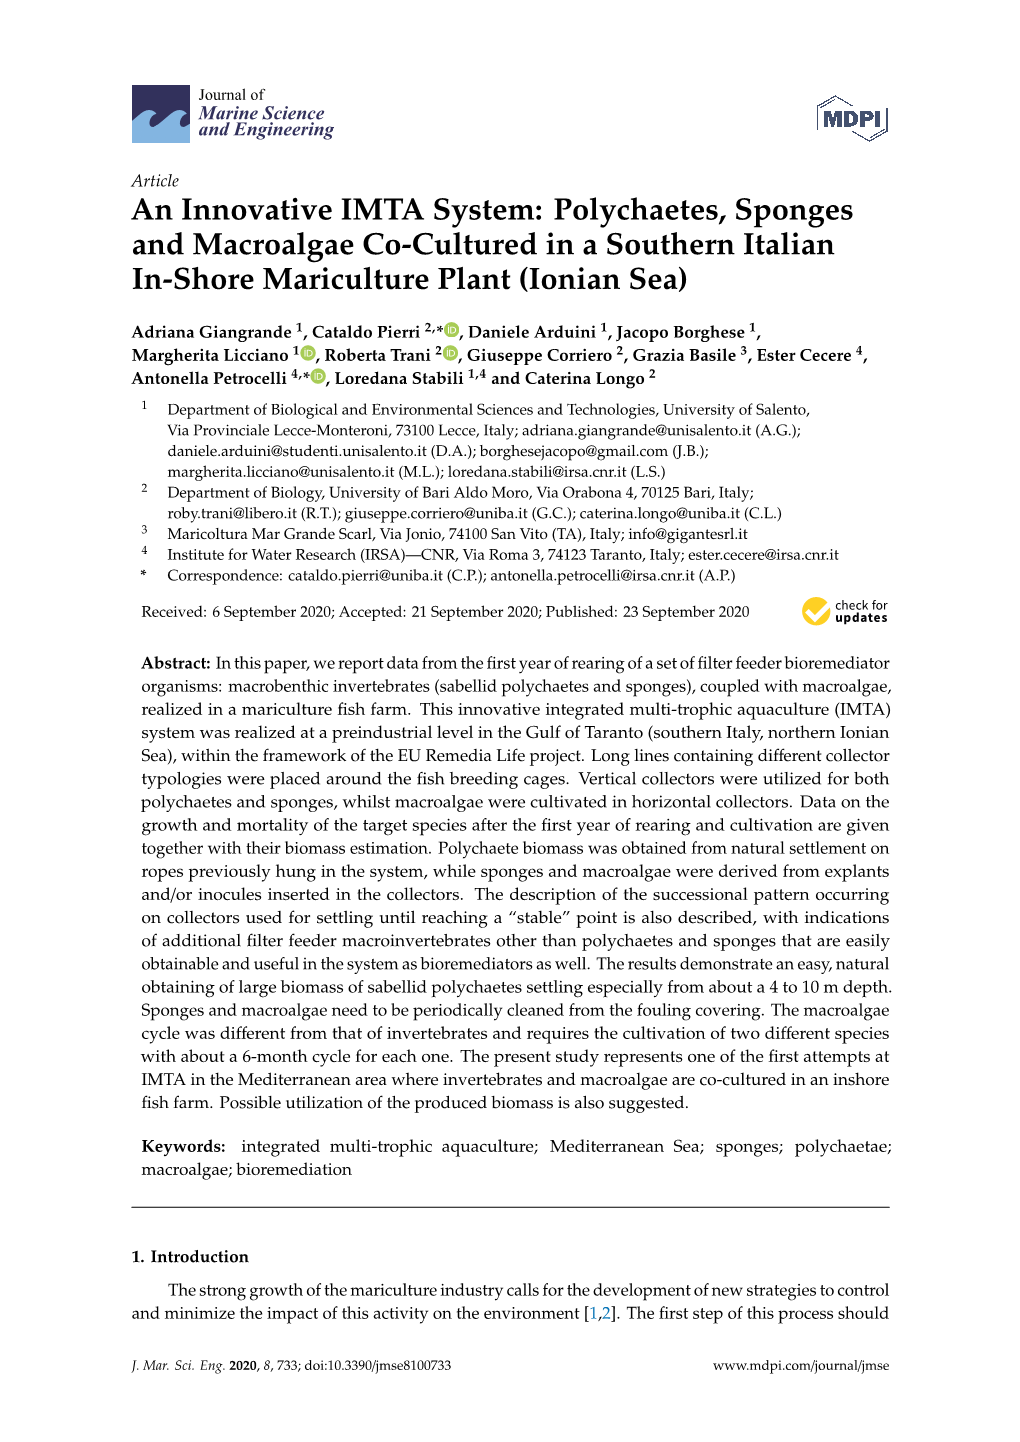 An Innovative IMTA System: Polychaetes, Sponges and Macroalgae Co-Cultured in a Southern Italian In-Shore Mariculture Plant (Ionian Sea)